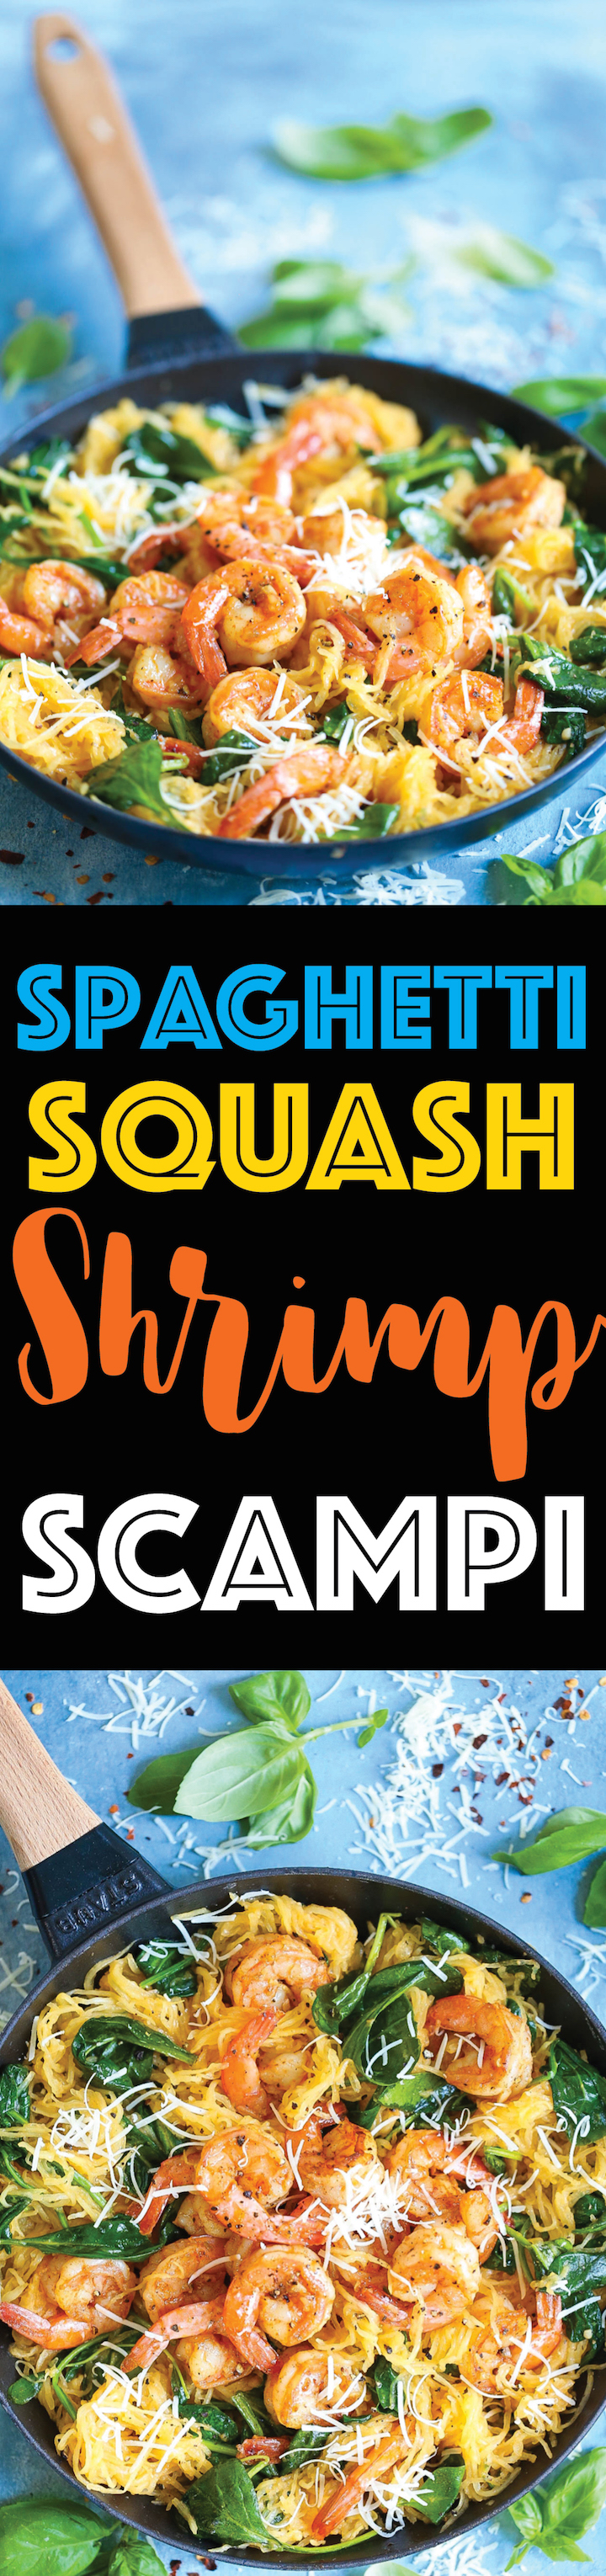 Shrimp Scampi Spaghetti Squash - Everyone's favorite shrimp scampi with a low-carb, healthier alternative to pasta using spaghetti squash! It's still amazingly buttery and garlicky with half the calories!